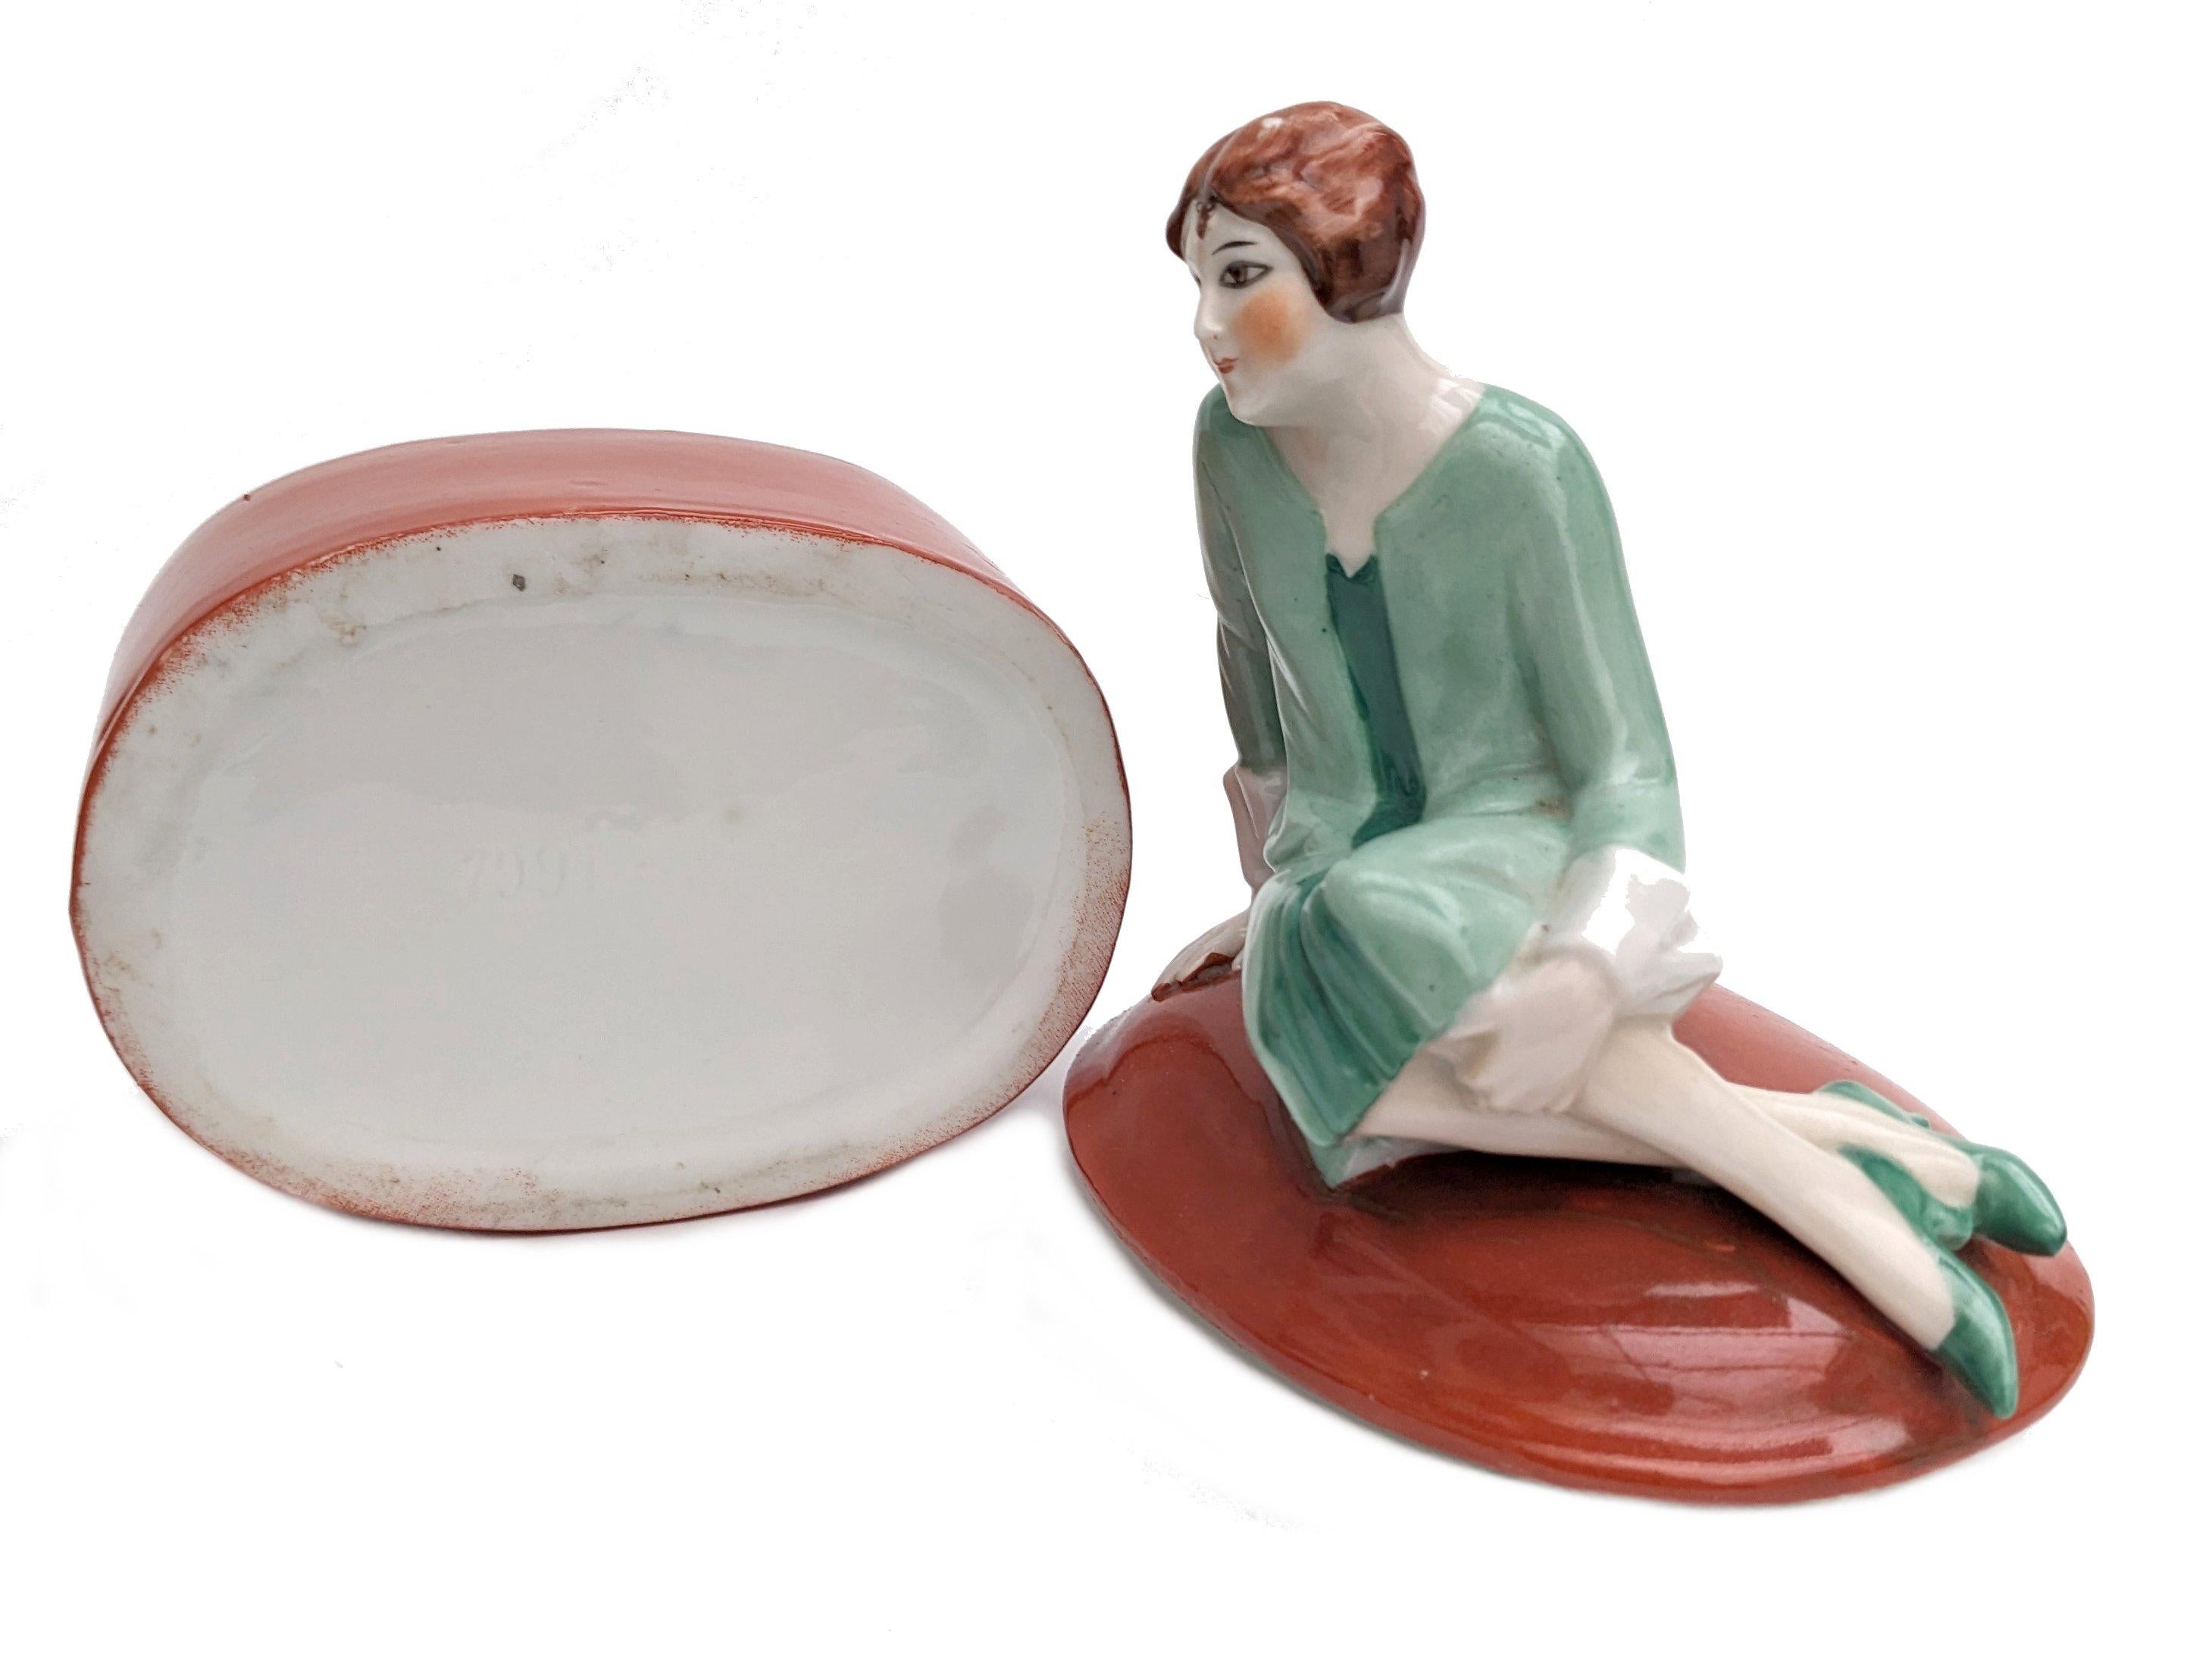 Wonderful 1930's Art Deco ceramic powder box. A rare design and highly sought after. The attention to detail is just wonderful, so skillfully painted, from her slightly blushed cheeks to her tiny fingers, everything about this piece screams quality